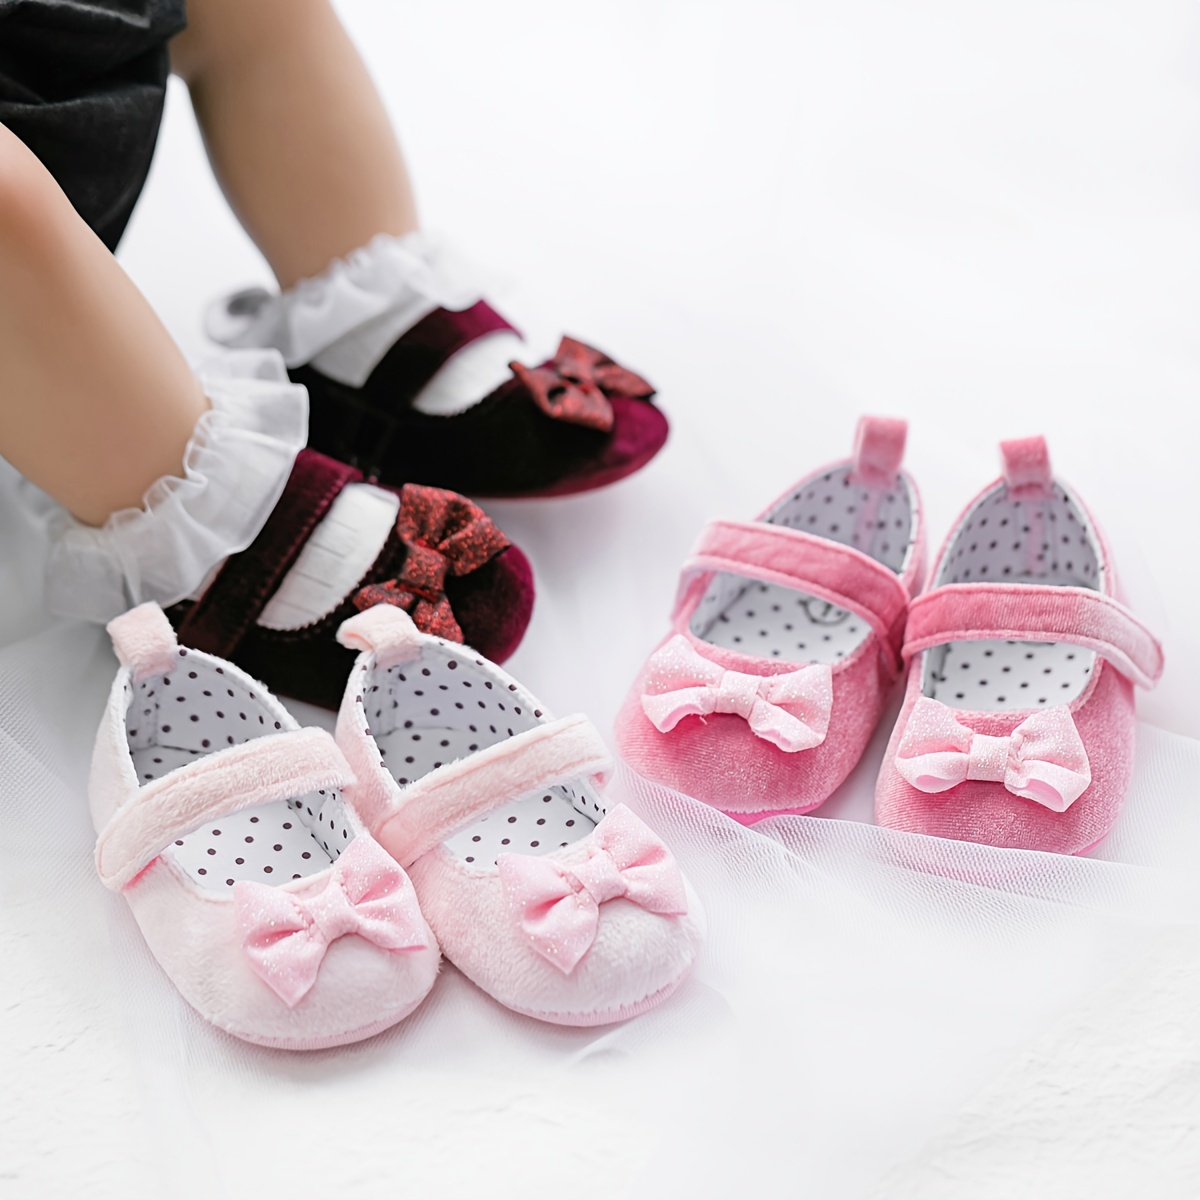 Shoes Kids - Newborn Baby Shoes Girls Princess Solid 4-colors Anti